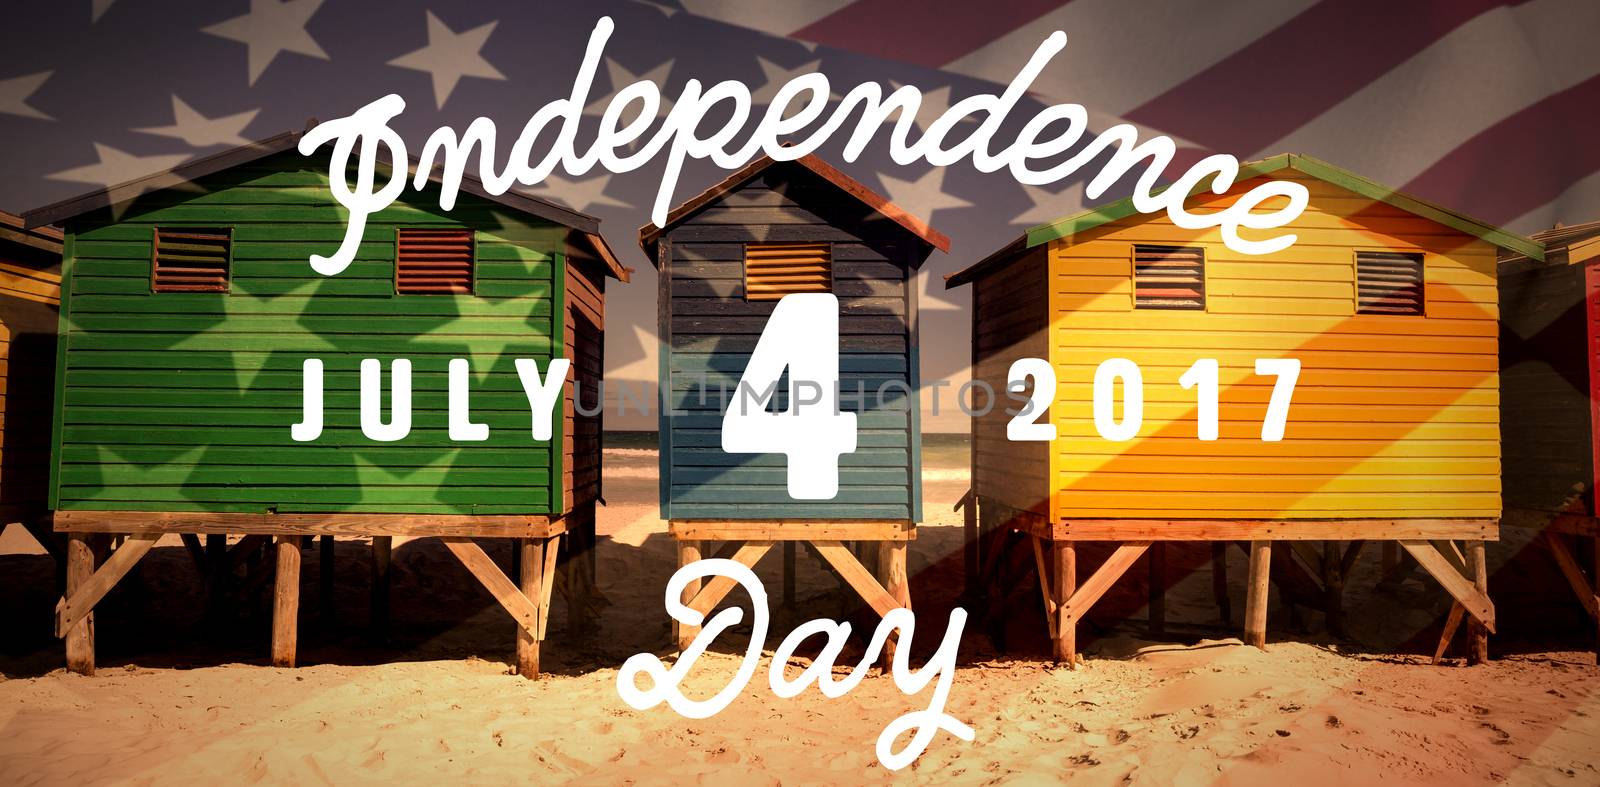 Digitally generated image of happy 4th of july message against colorful huts on sand at beach